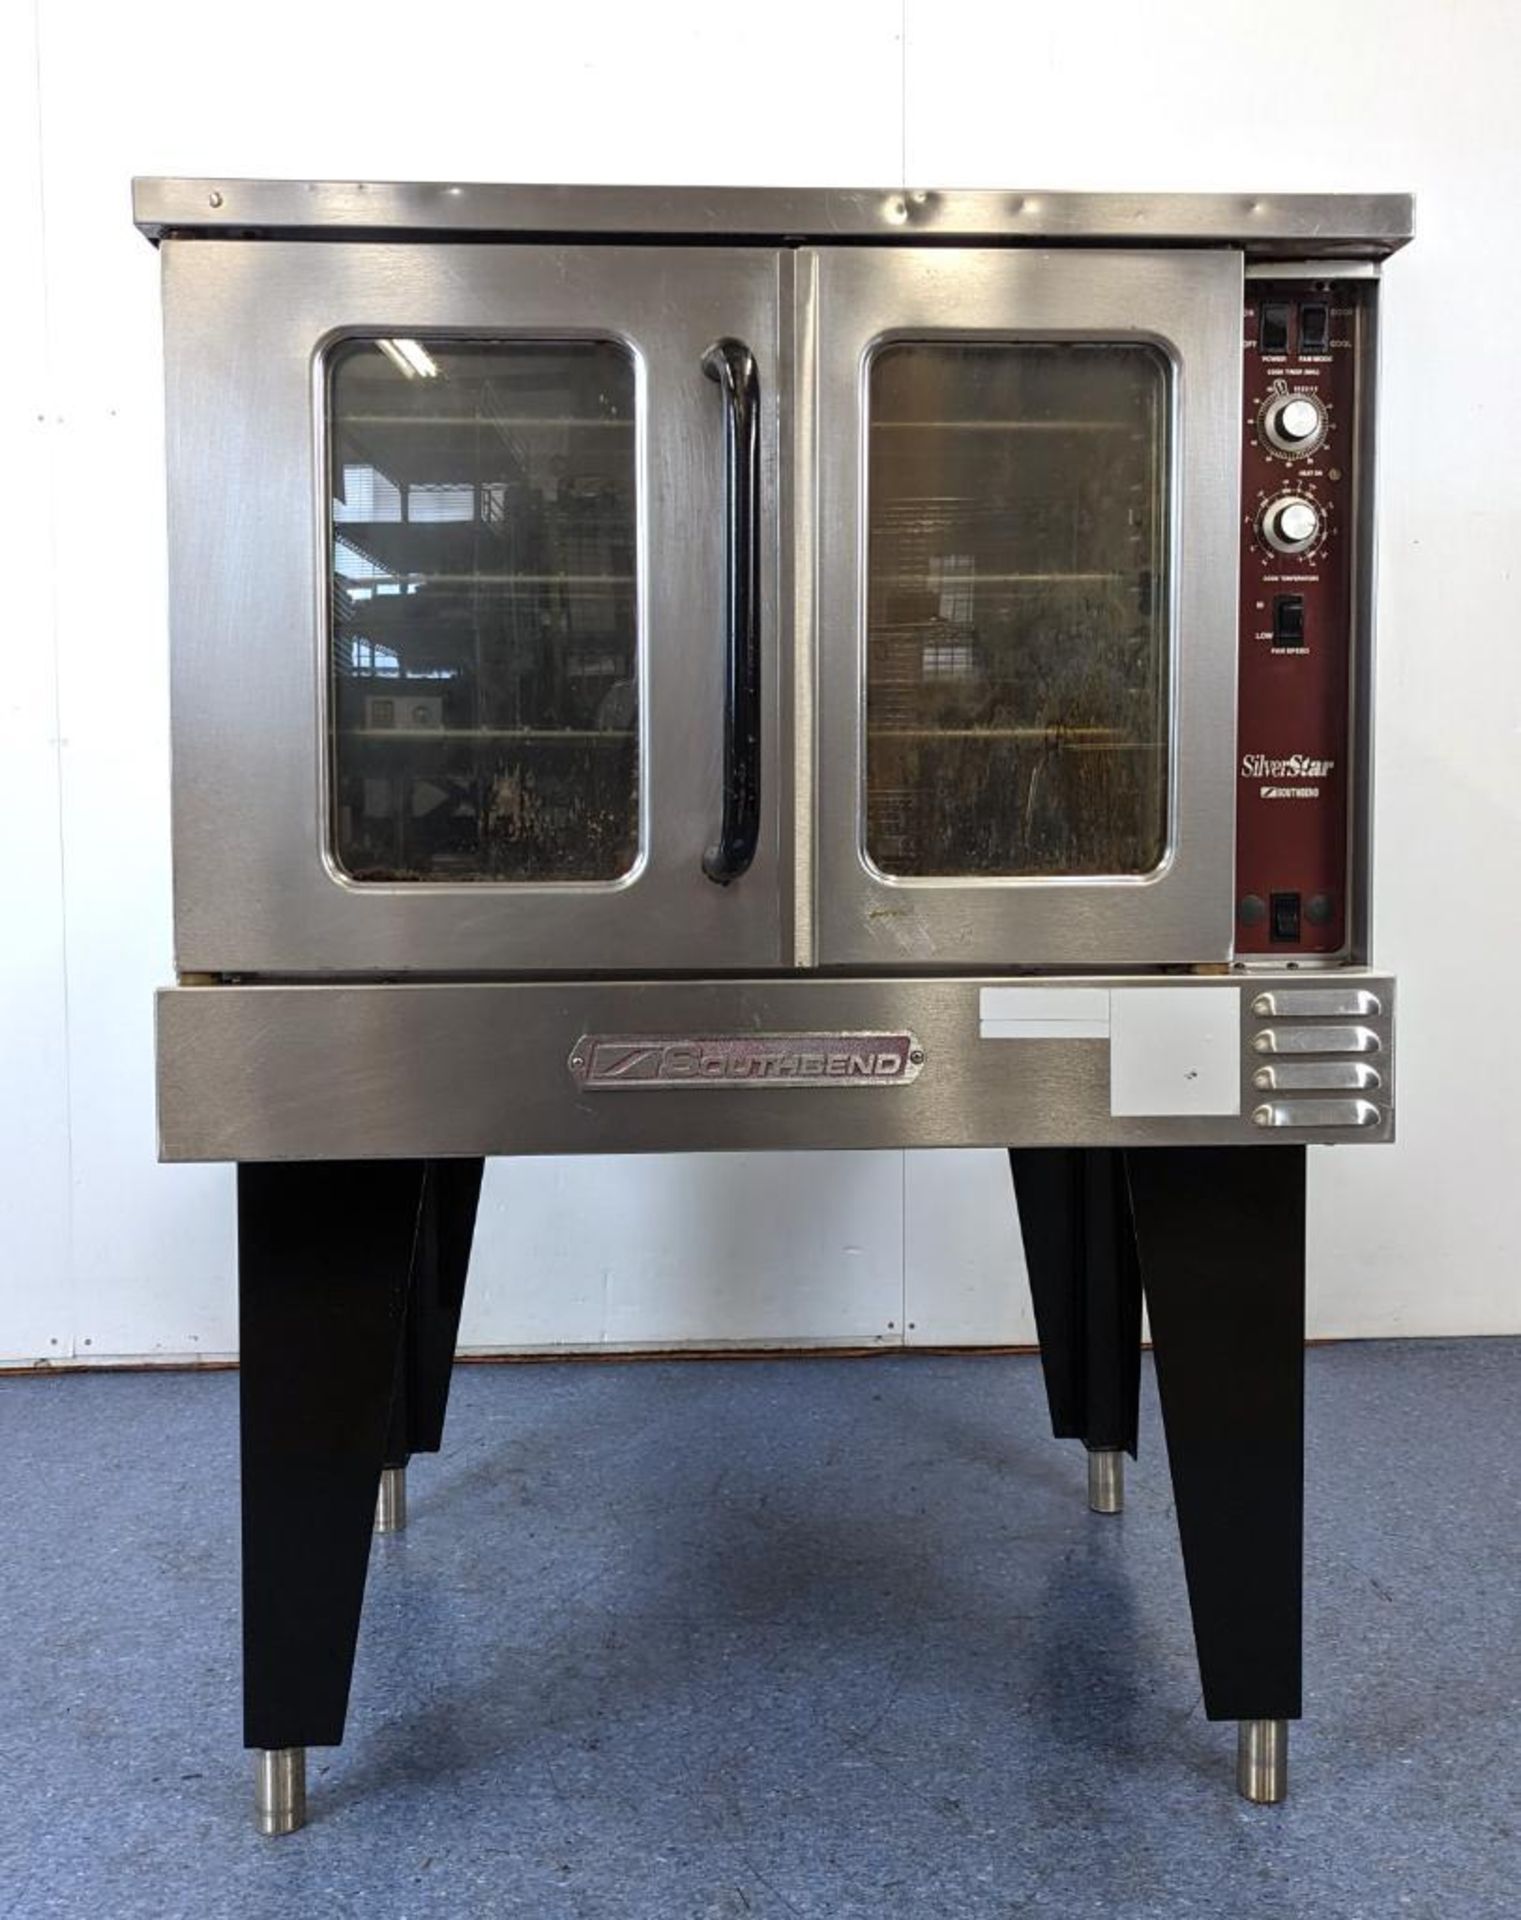 SOUTHBEND SLGS SILVERSTAR SINGLE FULL SIZE GAS CONVECTION OVEN